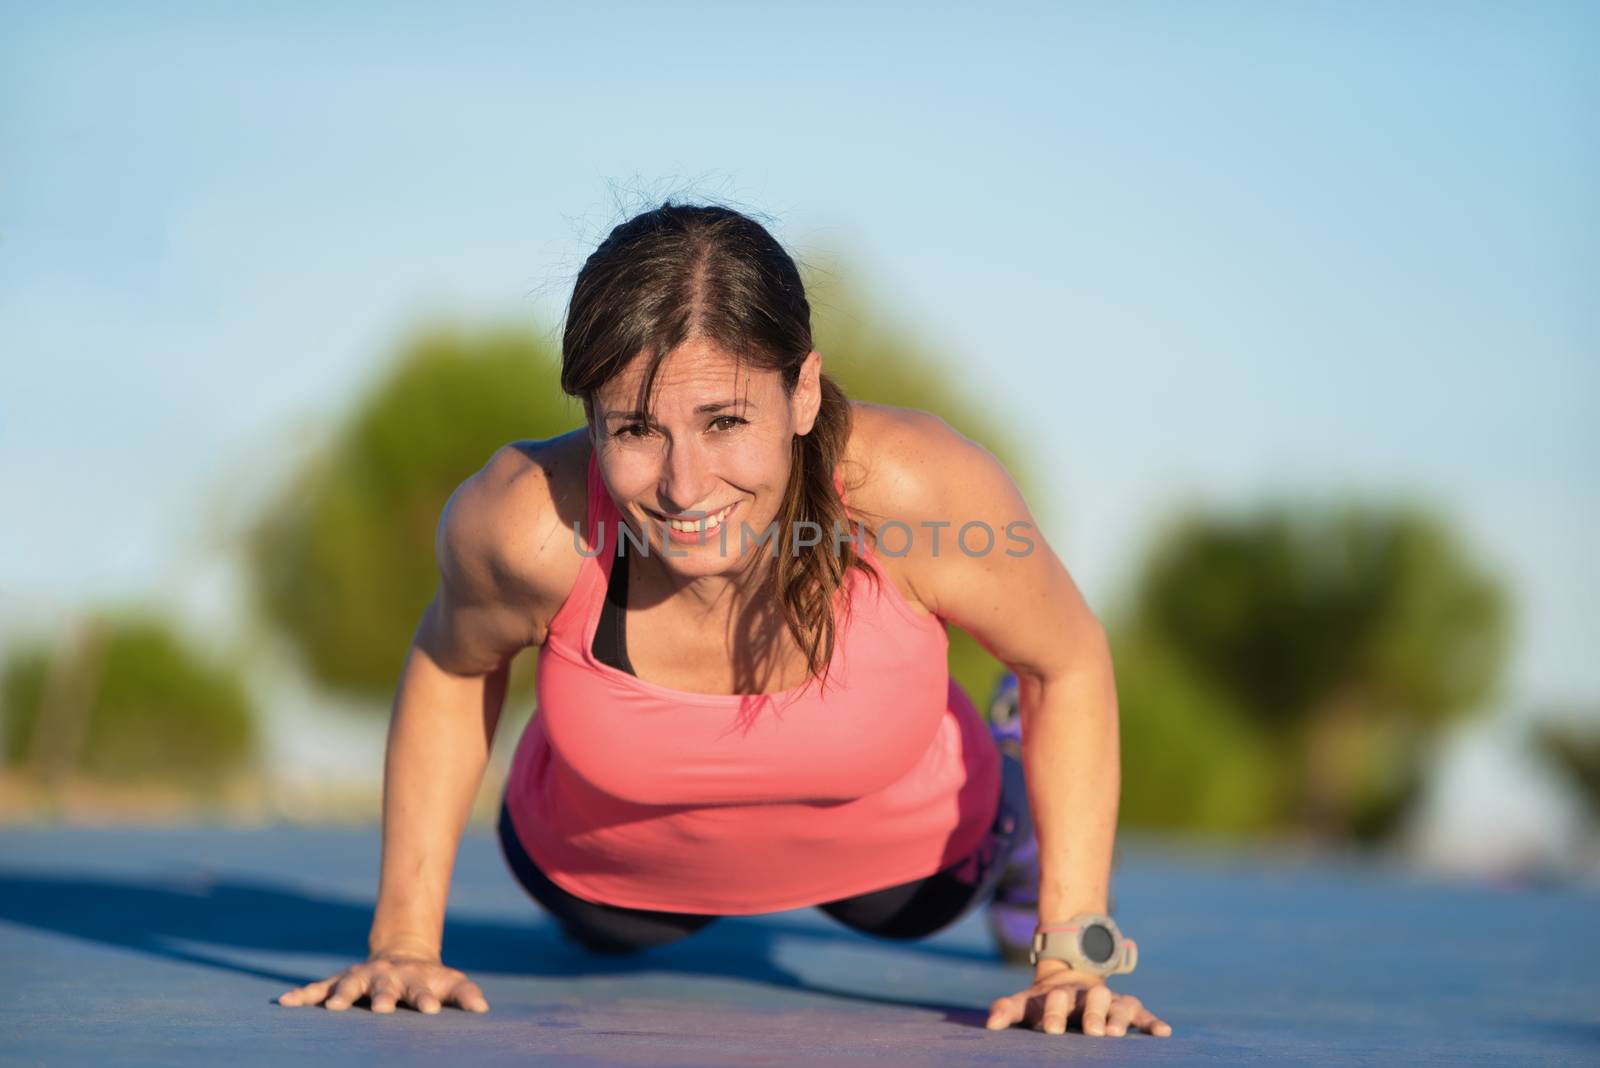 Fitness woman doing push-ups during outdoor cross training workout by HERRAEZ